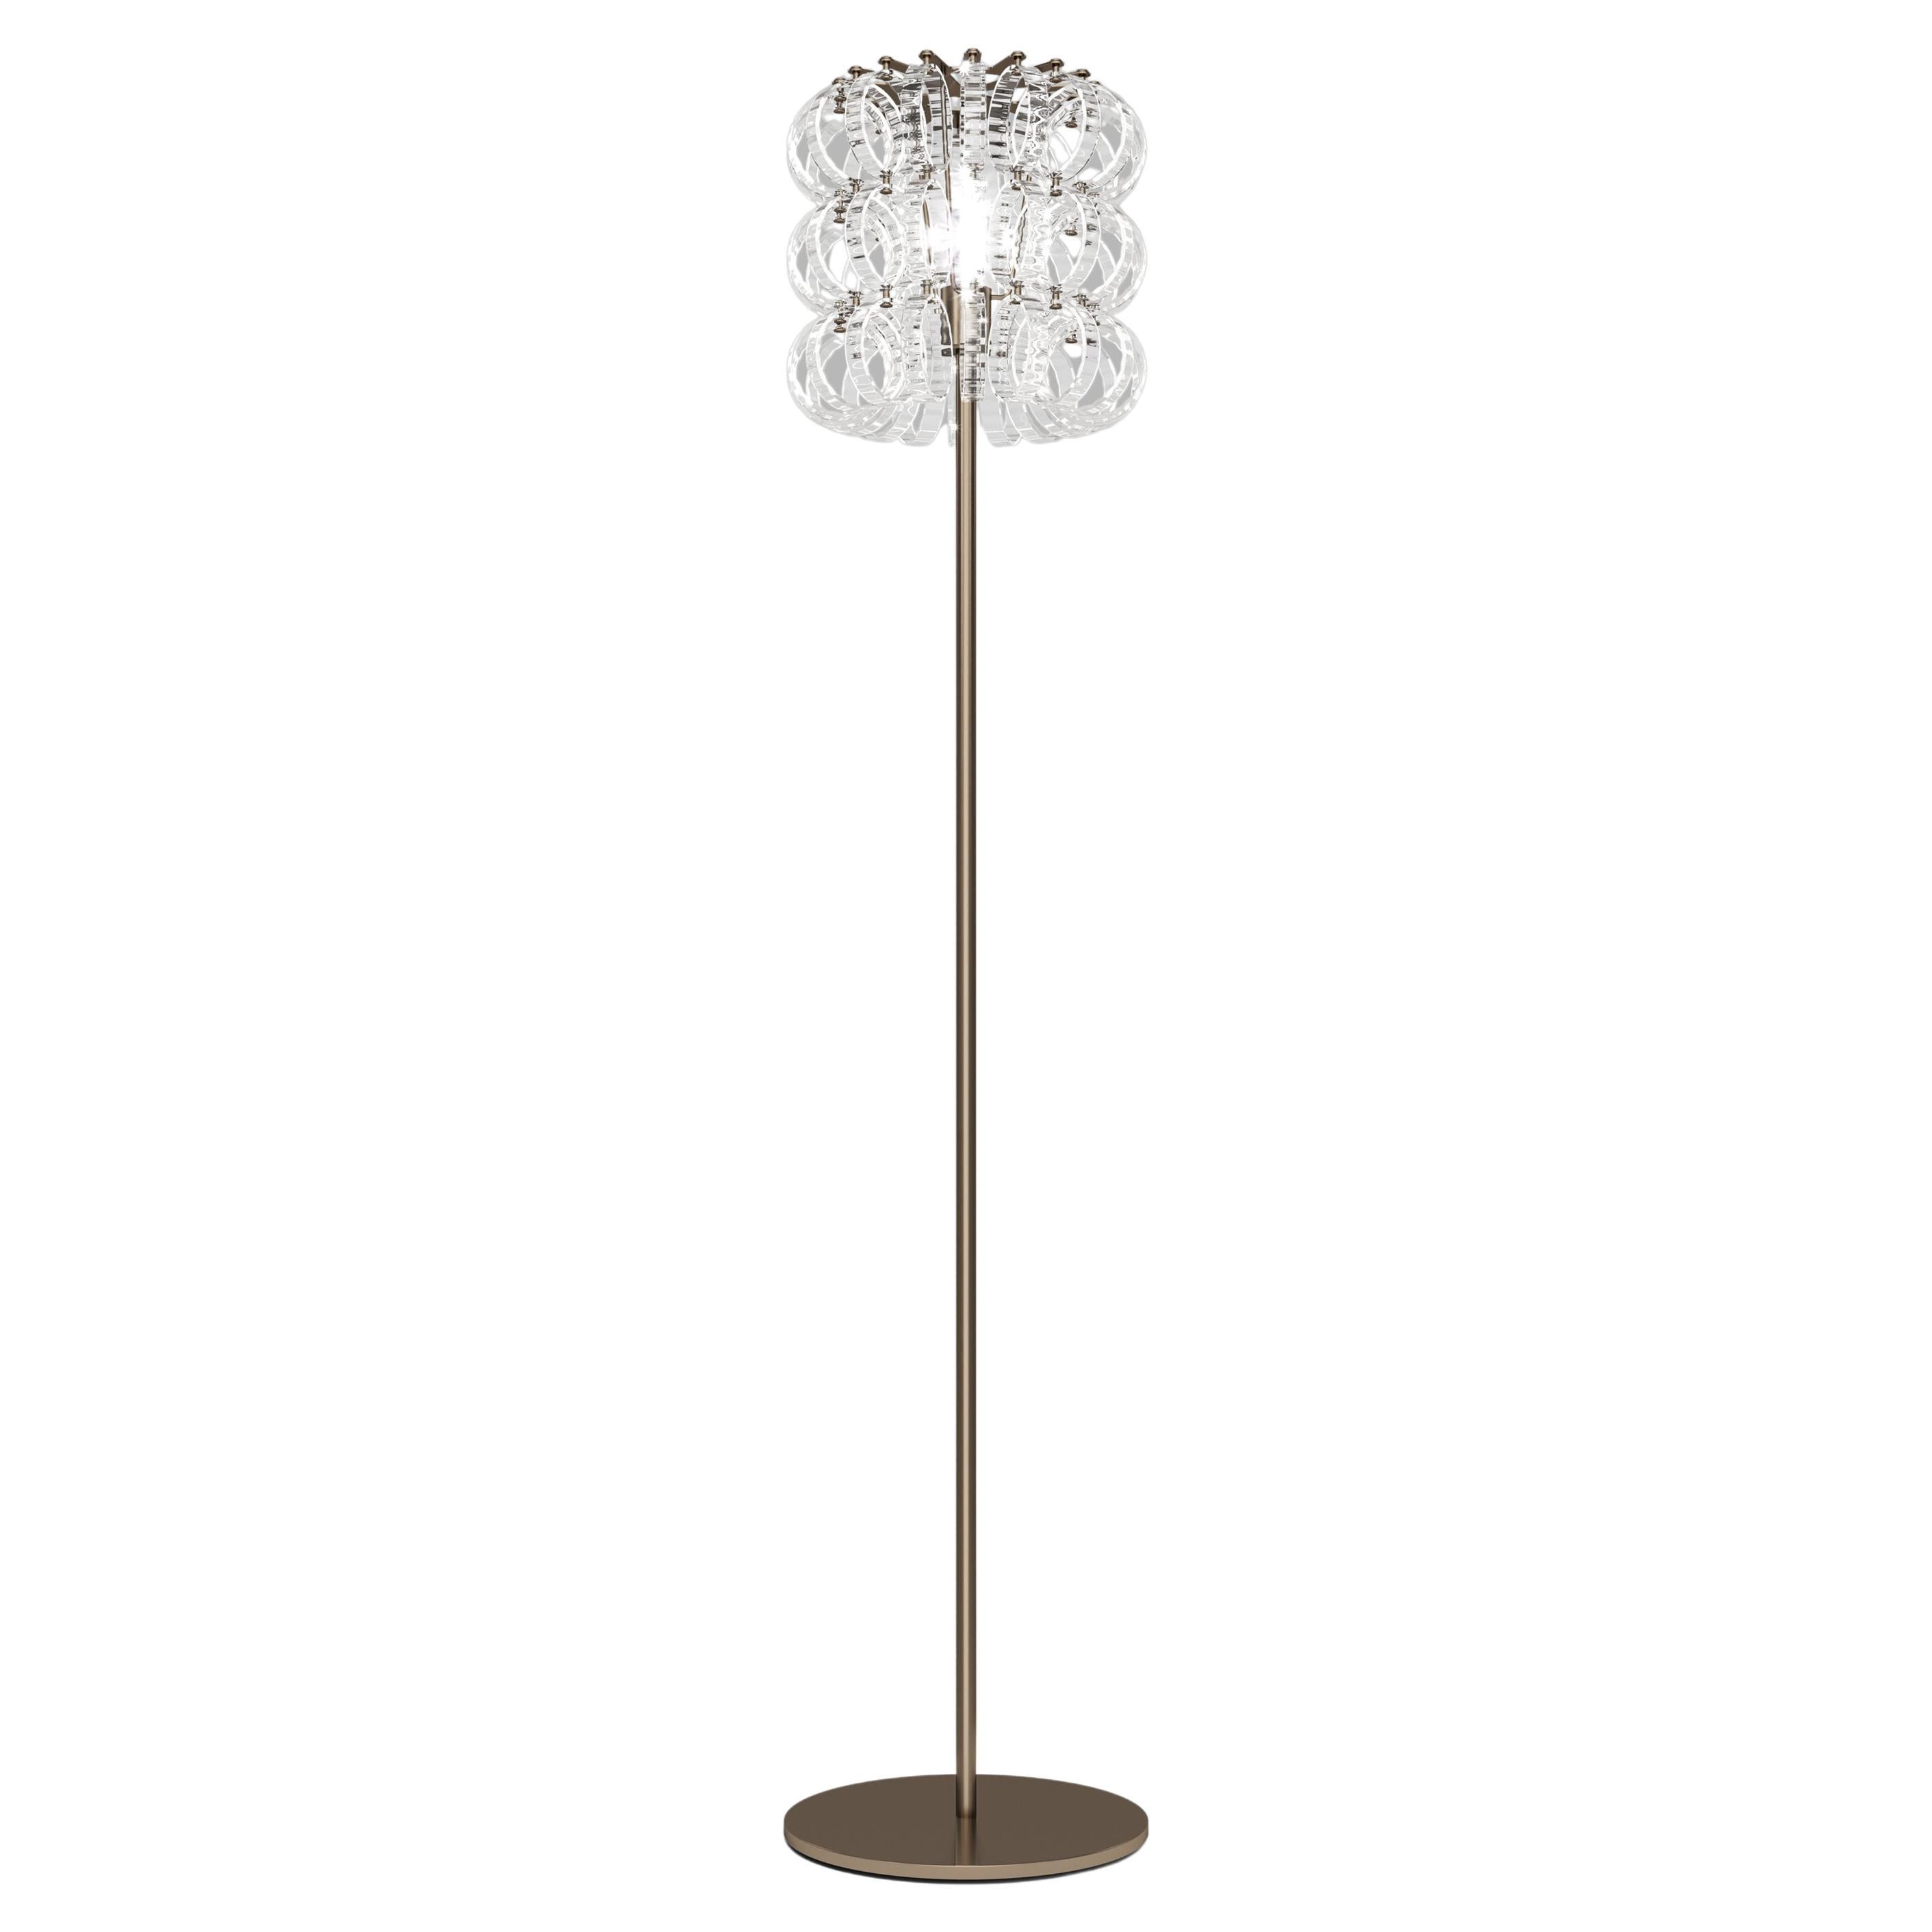 Vistosi Ecos Floor Lamp in Crystal Striped Glass with Matt Bronze Frame For Sale